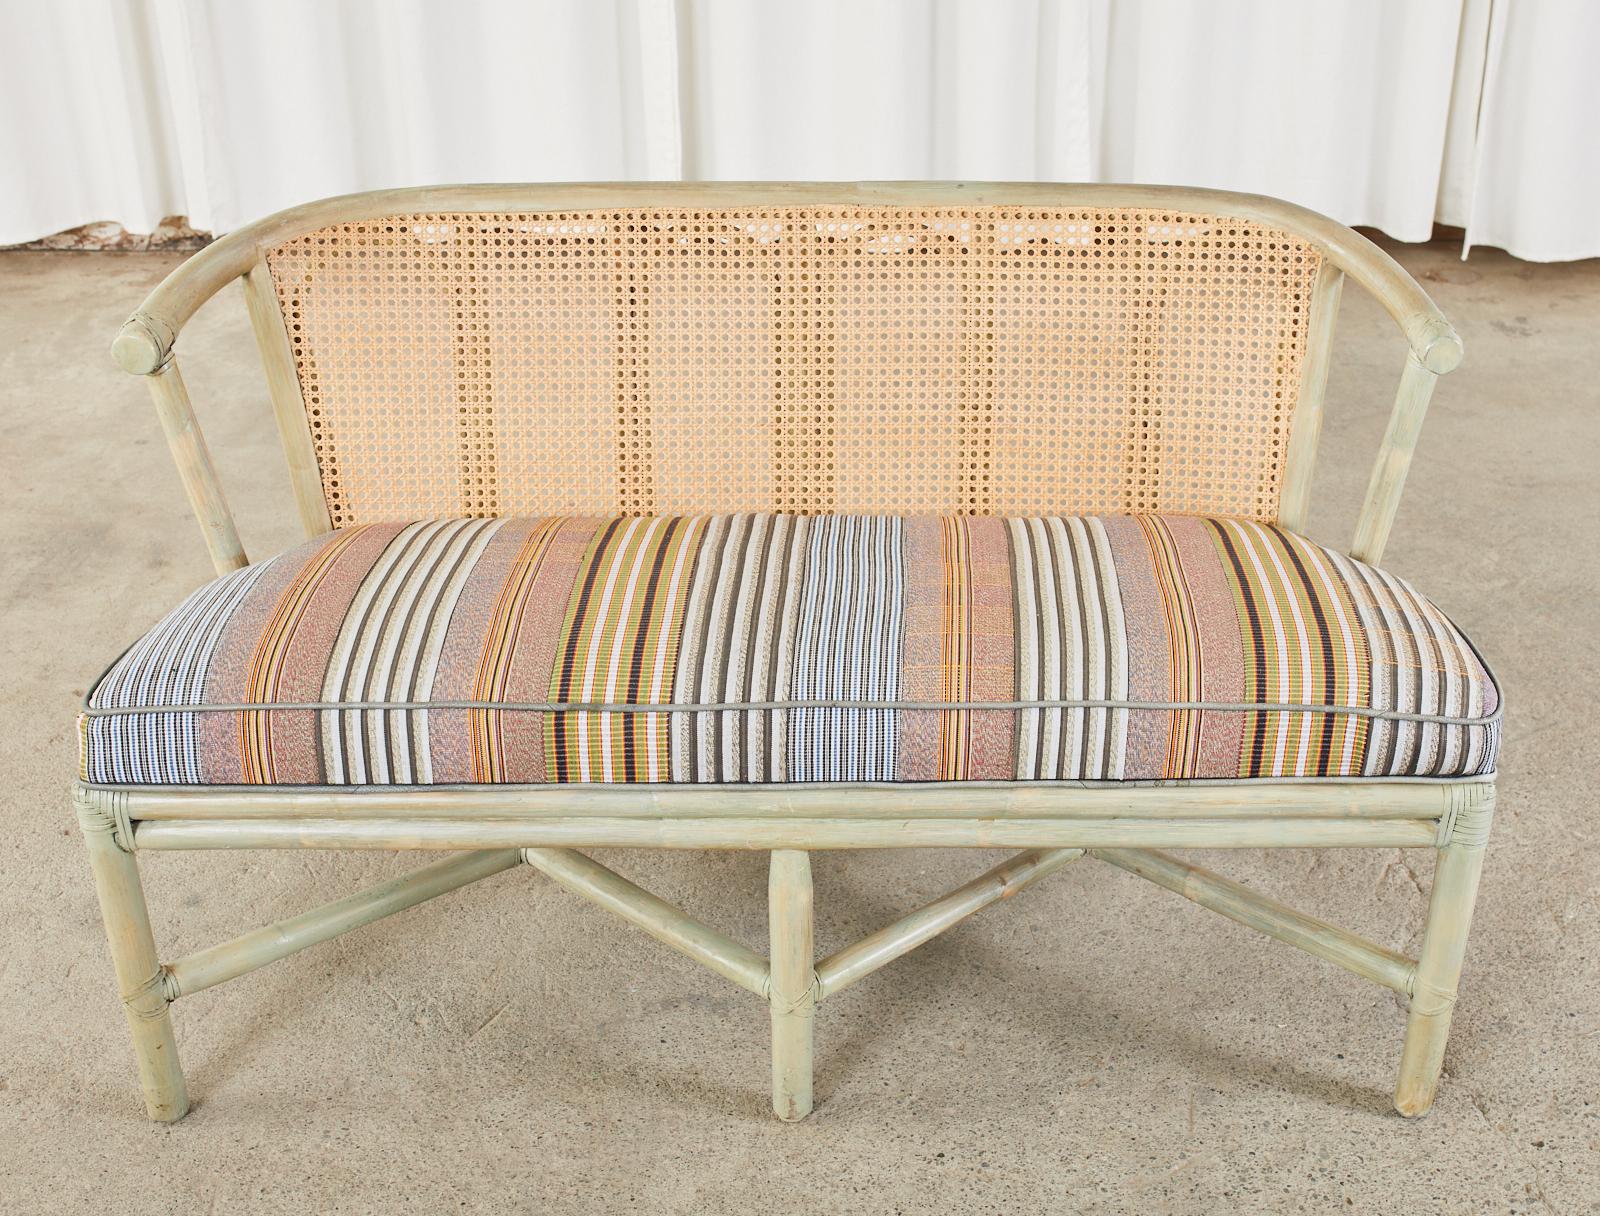 Lacquered organic modern style rattan bench seat or settee by McGuire. The small bench features a rattan frame that has been lacquered with a caned back rest. Lashed together with leather rawhide laces on the exposed joints. The open seat is fitted